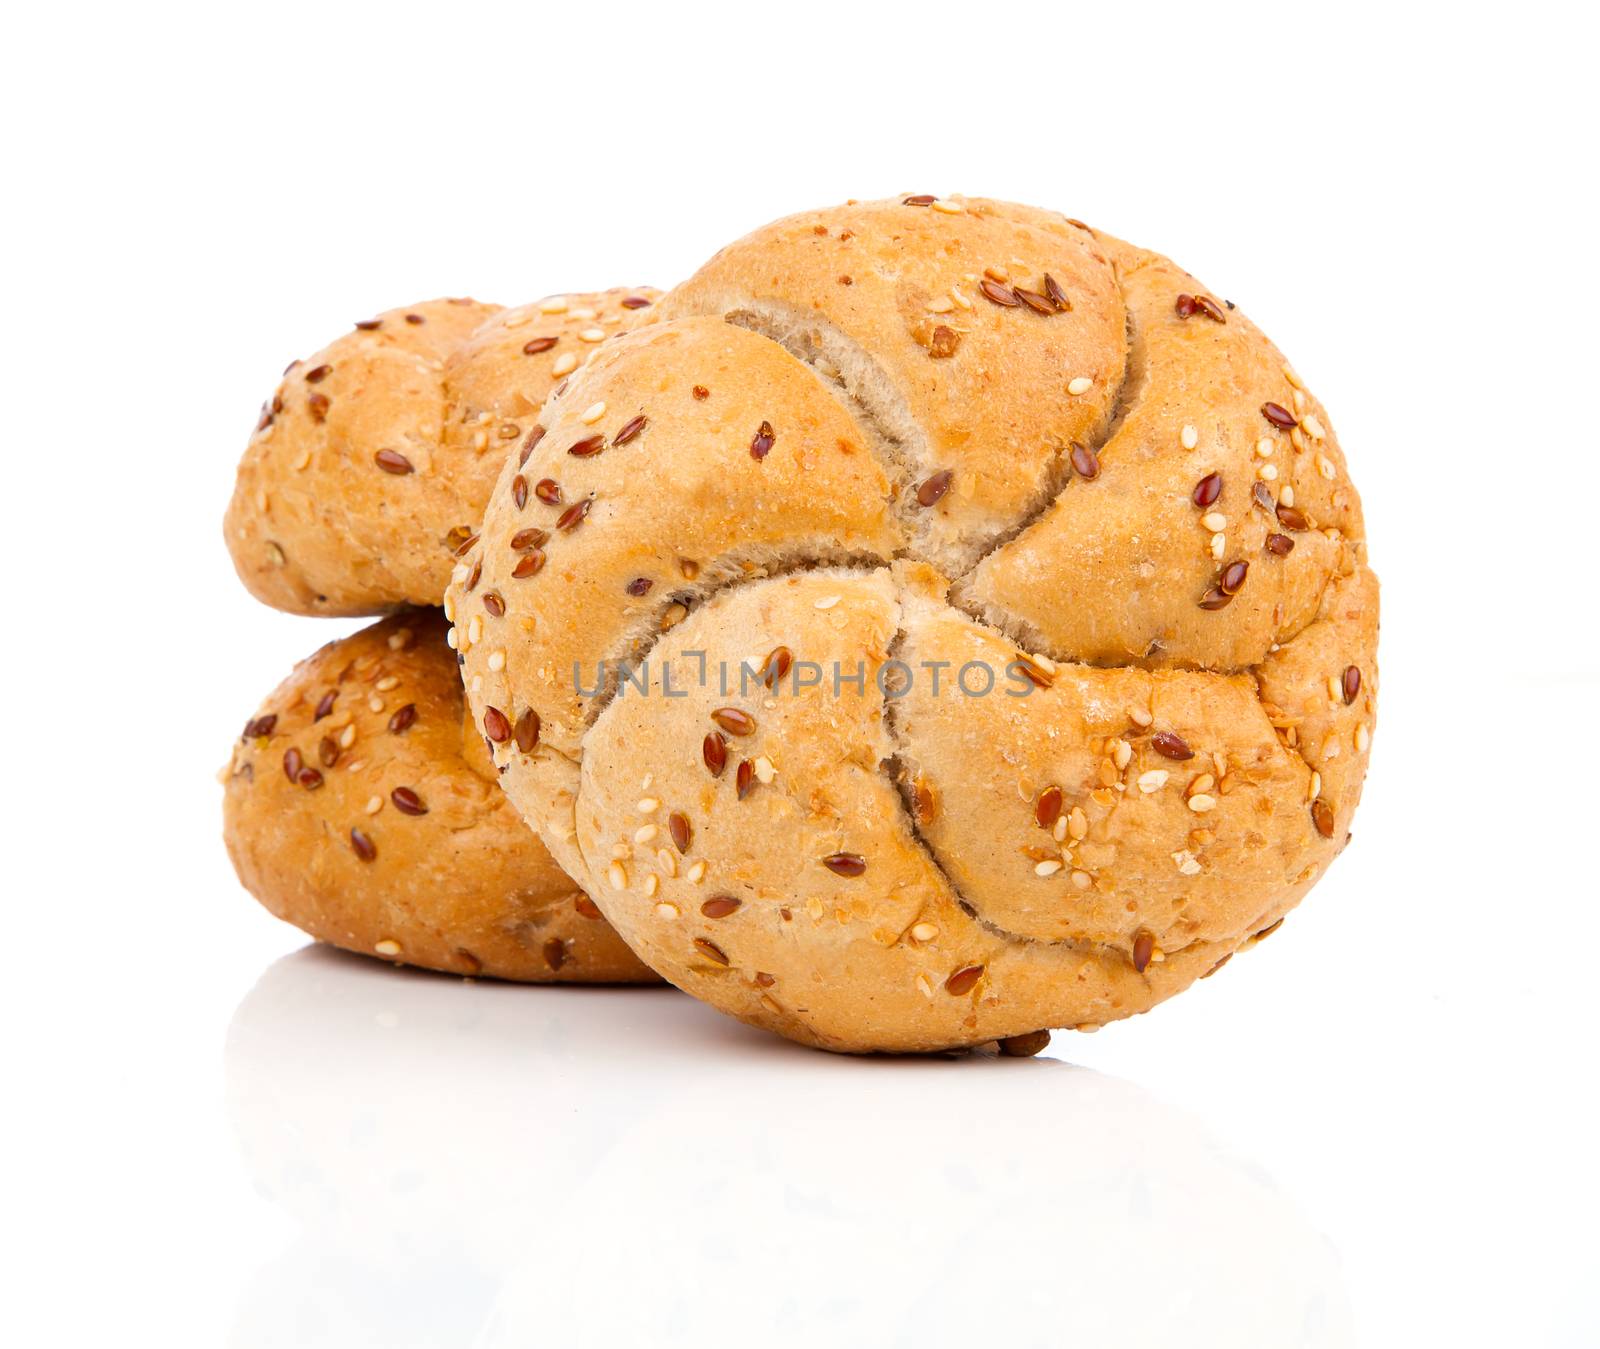 Kaiser roll with sesame seeds, on a white background by motorolka